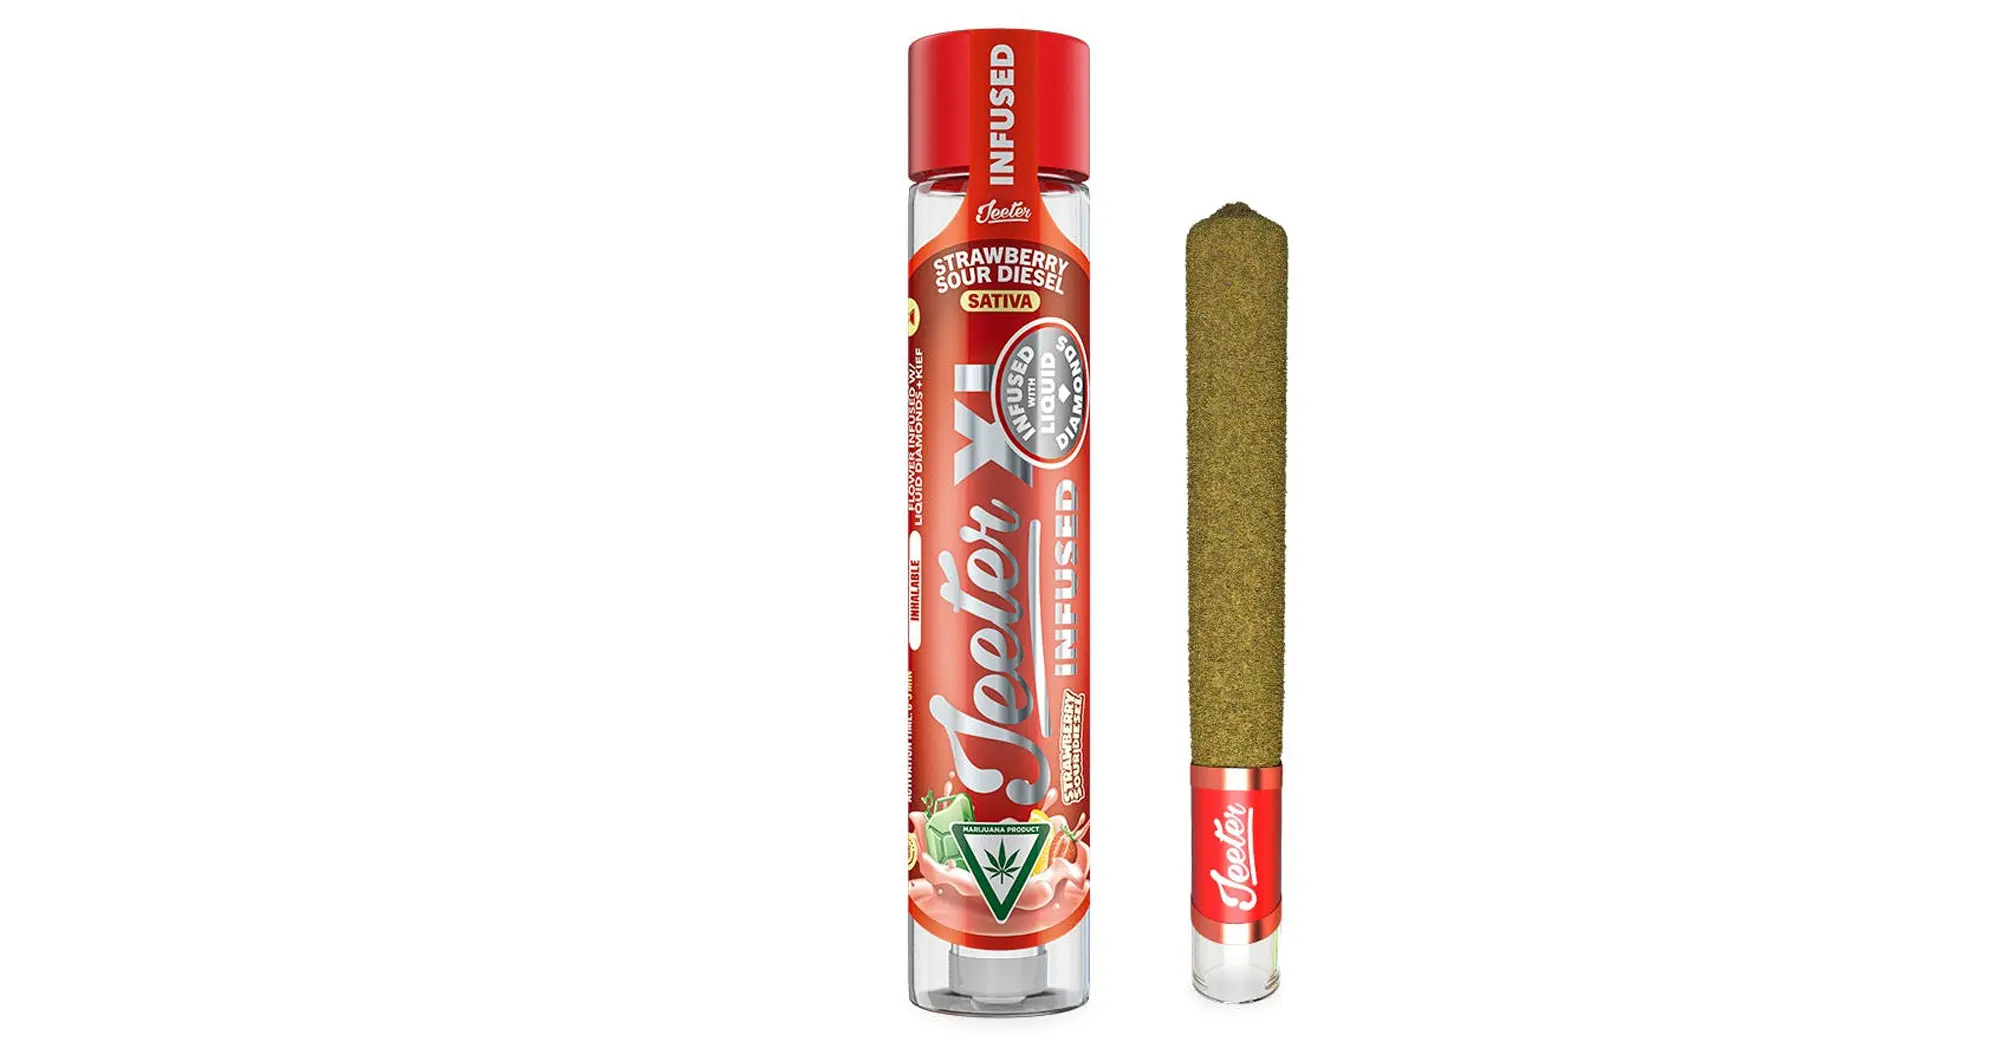 Strawberry Sour Diesel XL Infused Pre-Roll